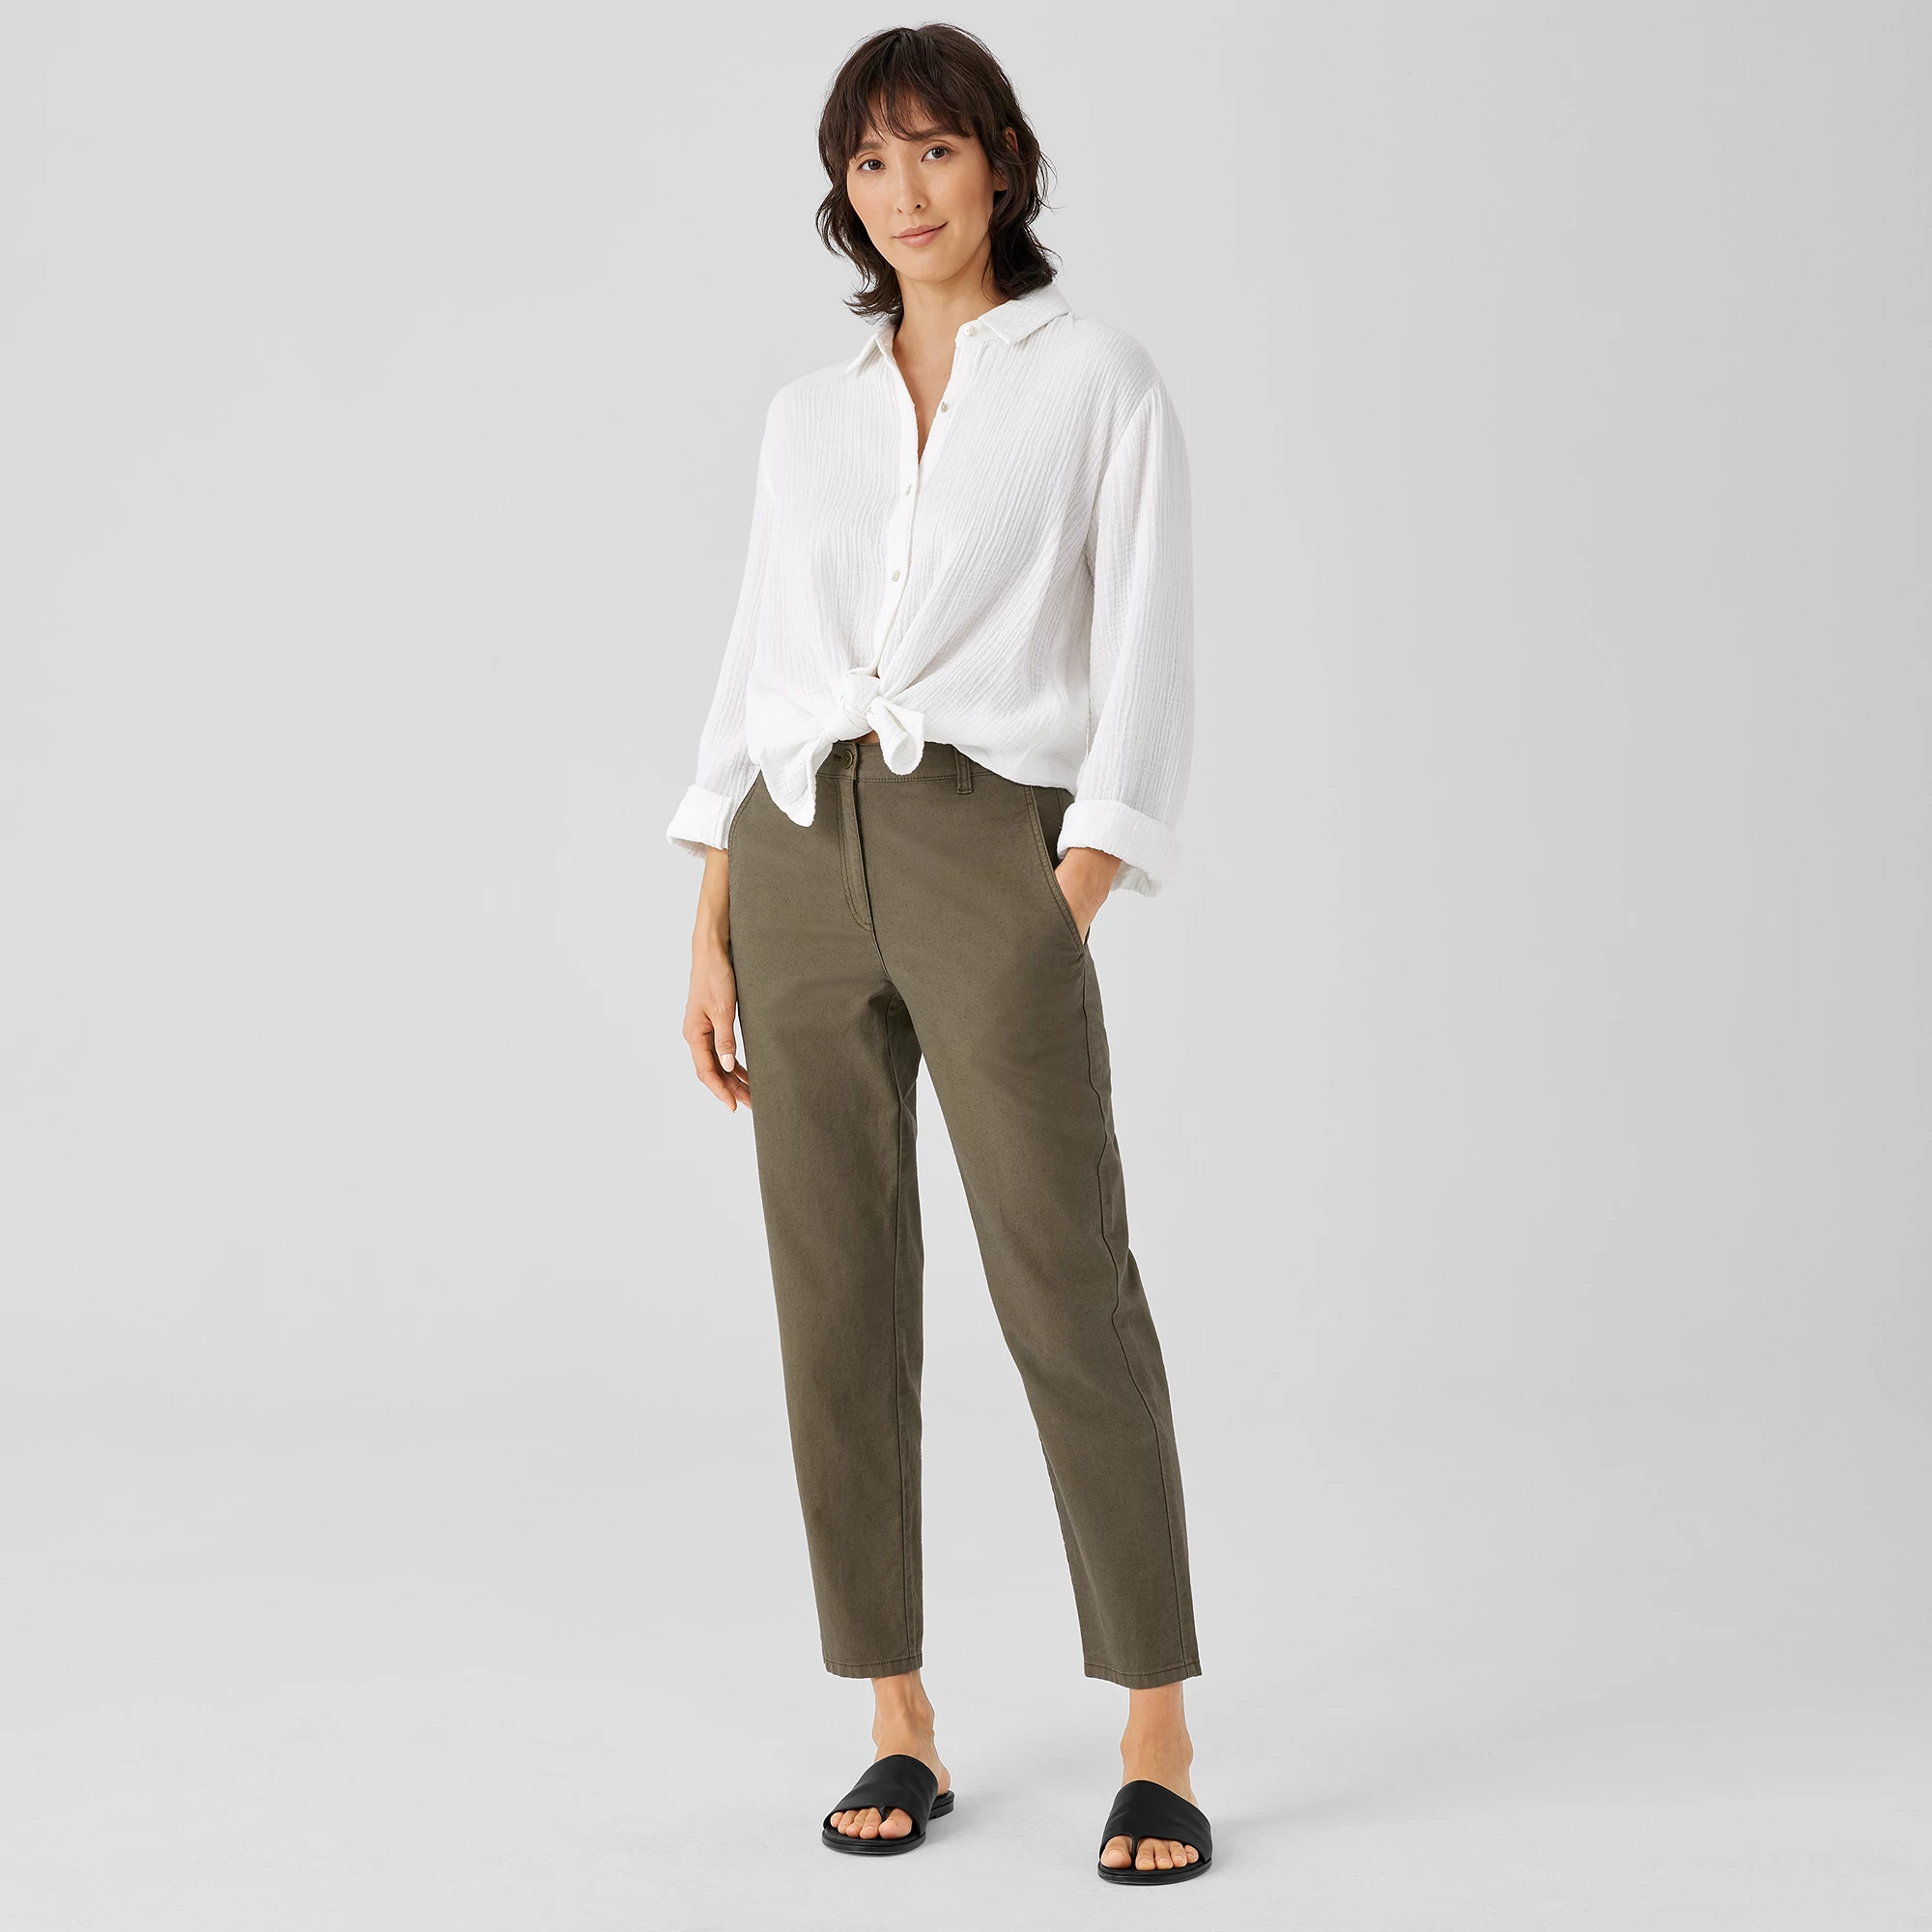 Discover 114+ linen blend tapered trousers best - camera.edu.vn